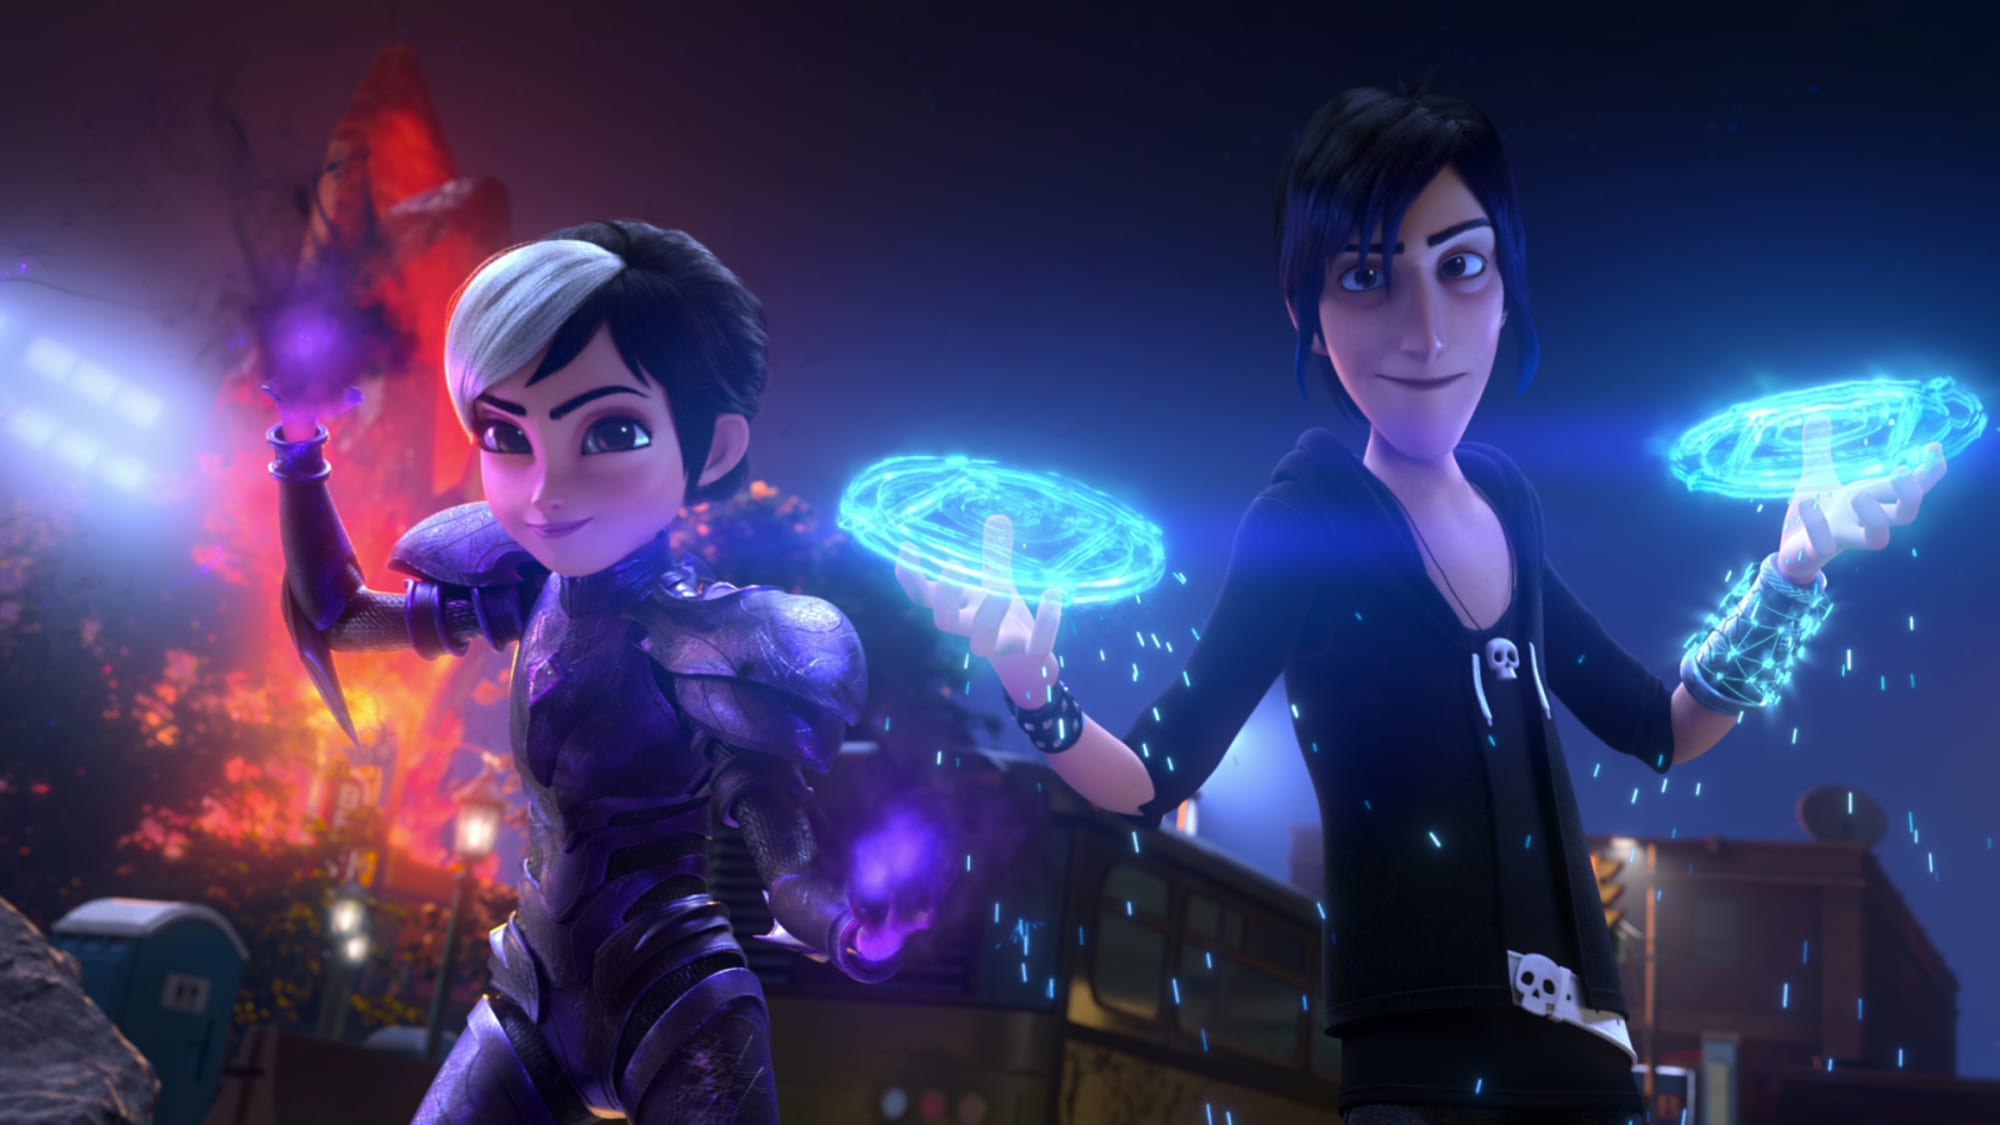 Trollhunters: Rise of the Titans is coming to Netflix: July 2021